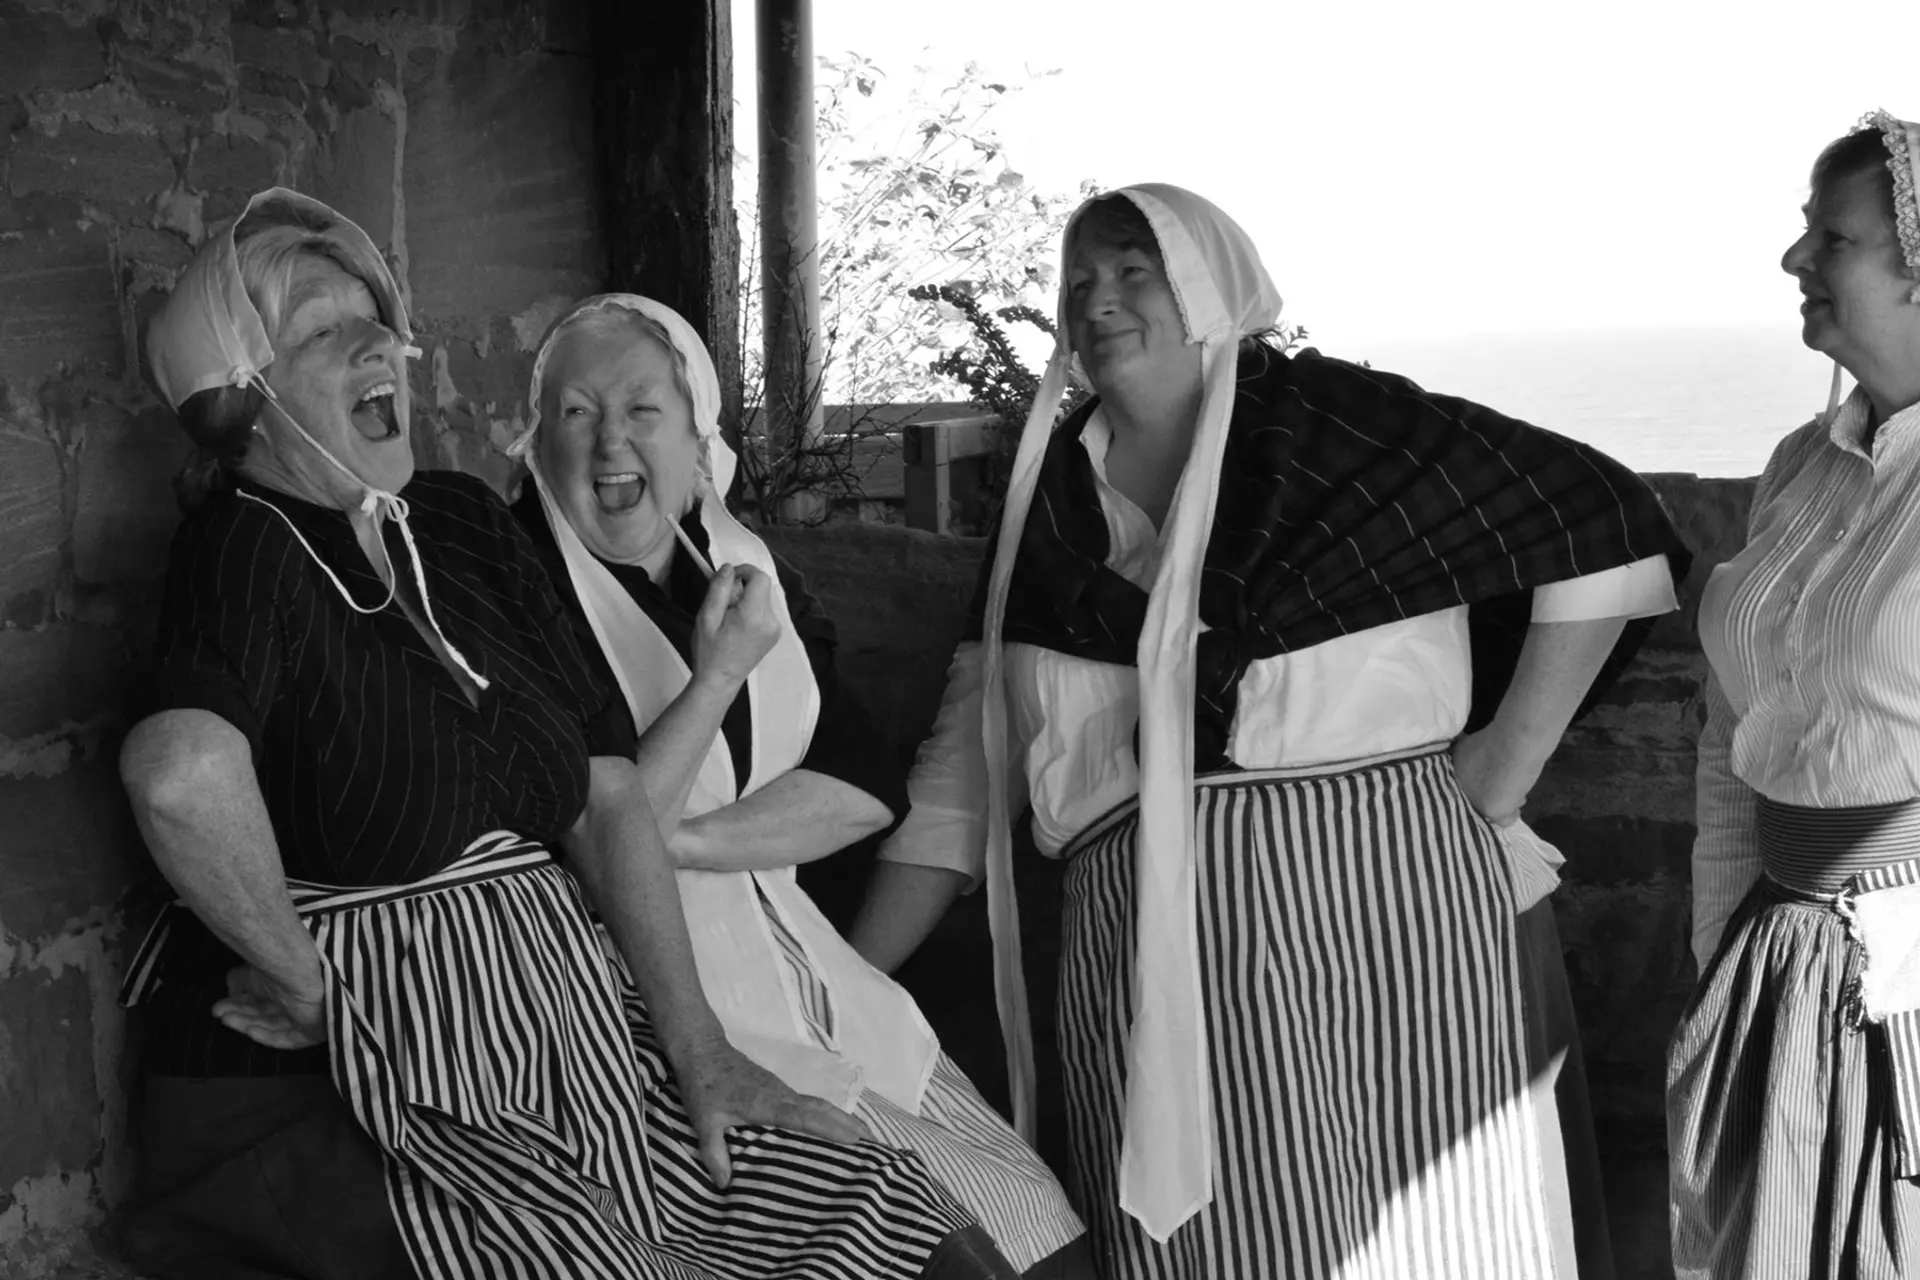 A black and white image of four women dressed up as fishwives, recreating an image from the past. They are laughing and one is smoking a pipe.